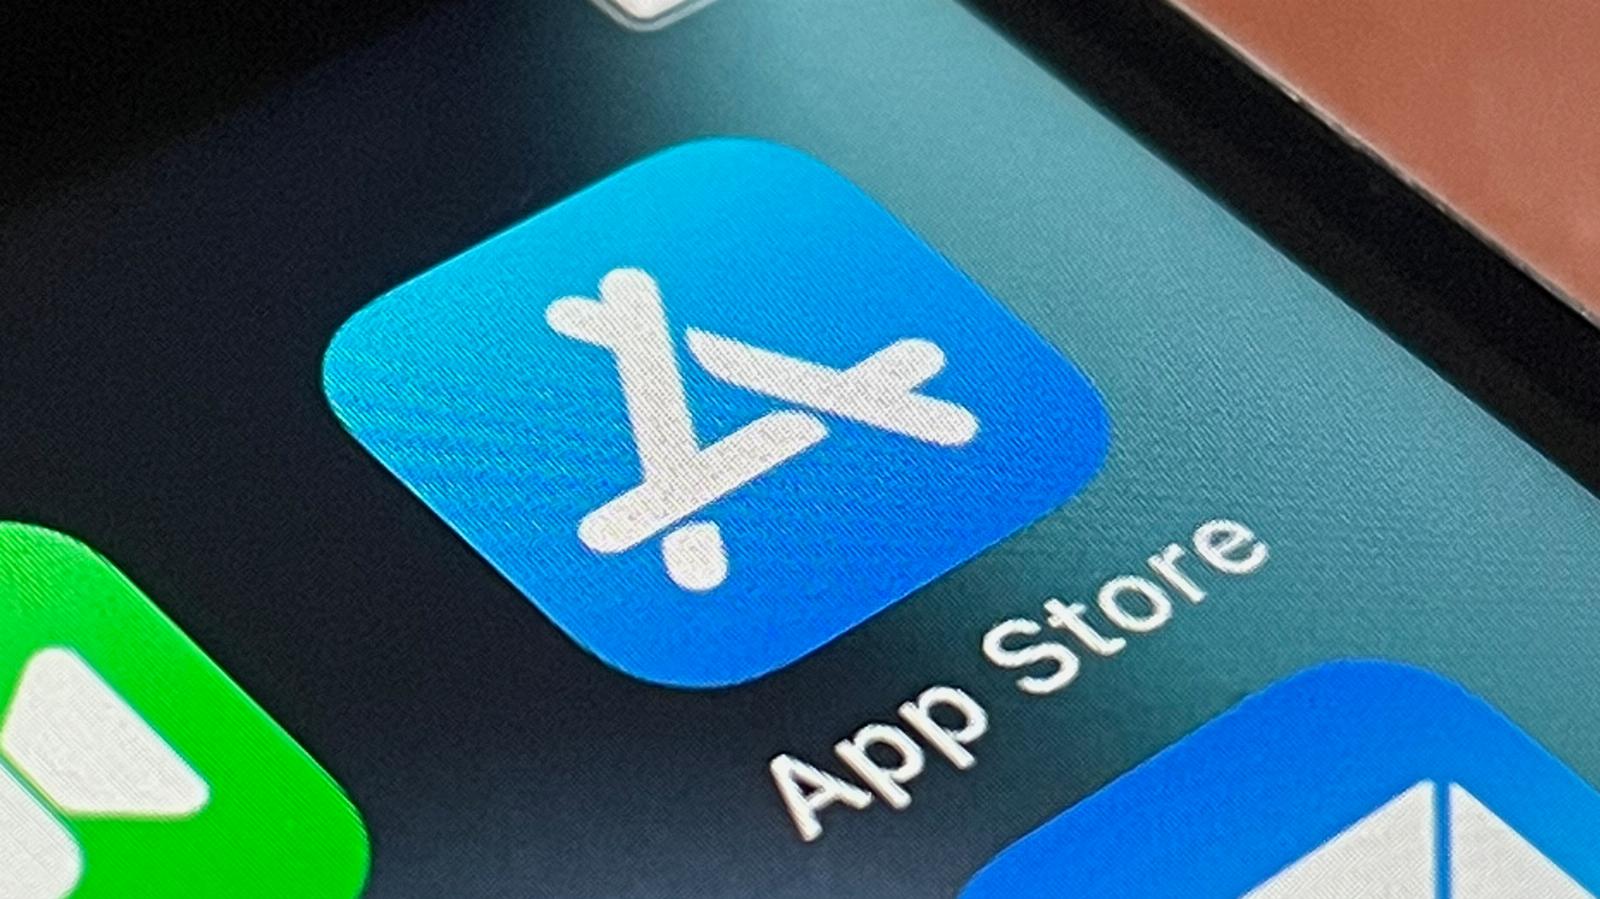 Apple updates its App Store rules to crack down on clones